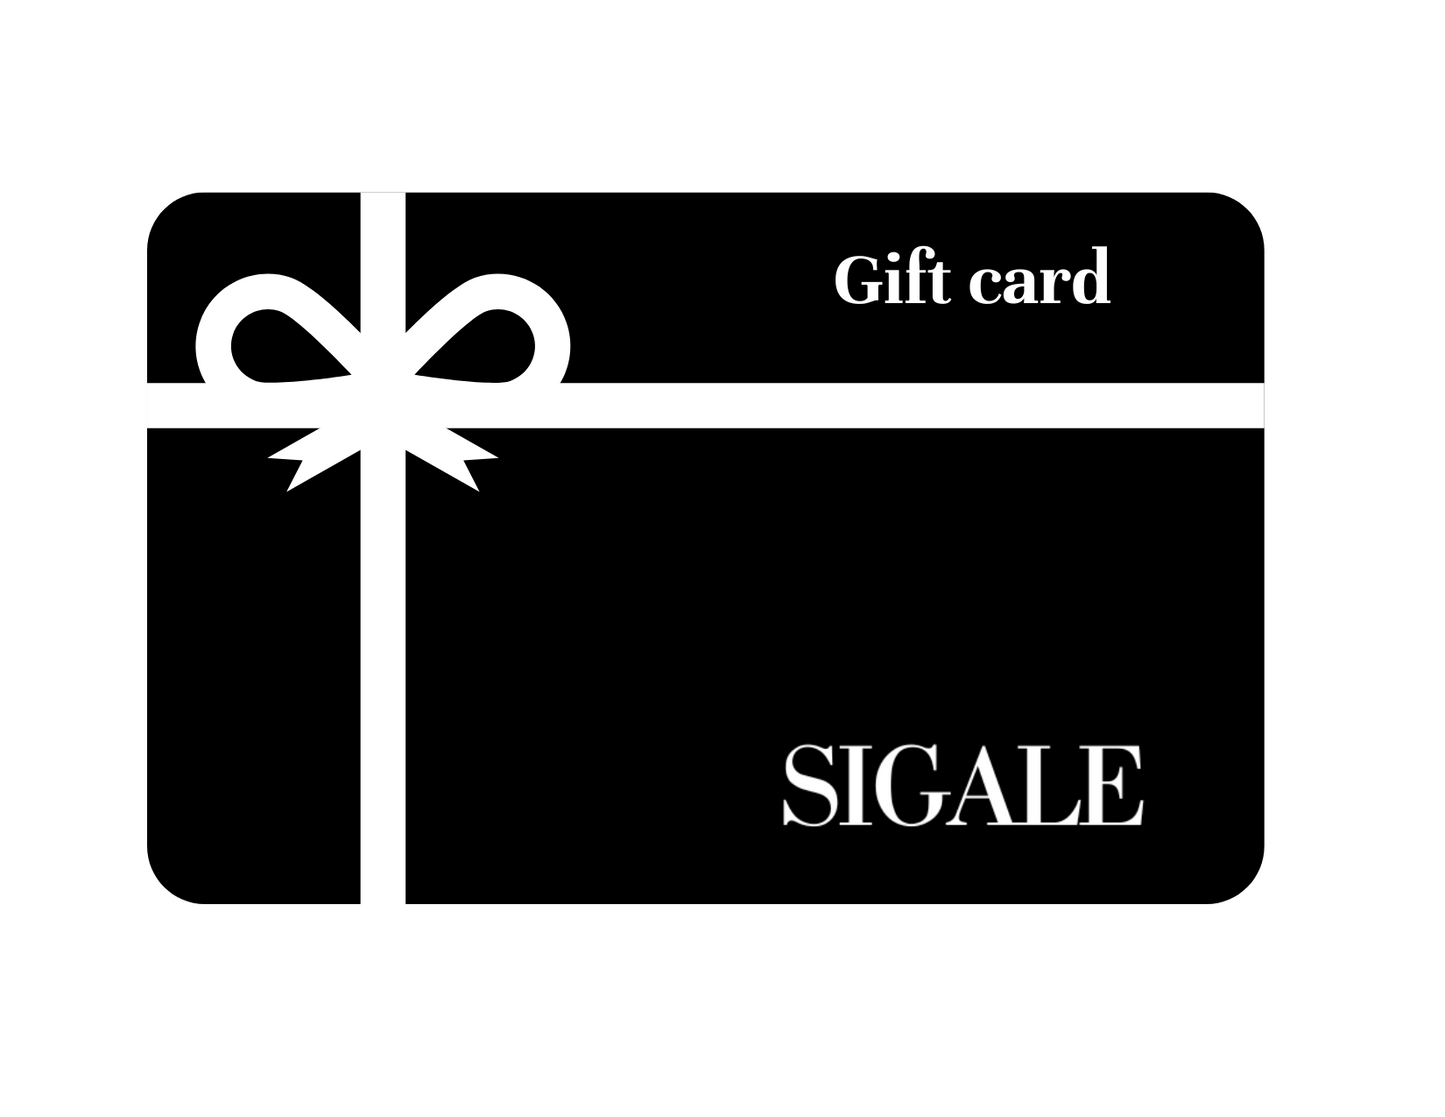 SIGALE Gift Card